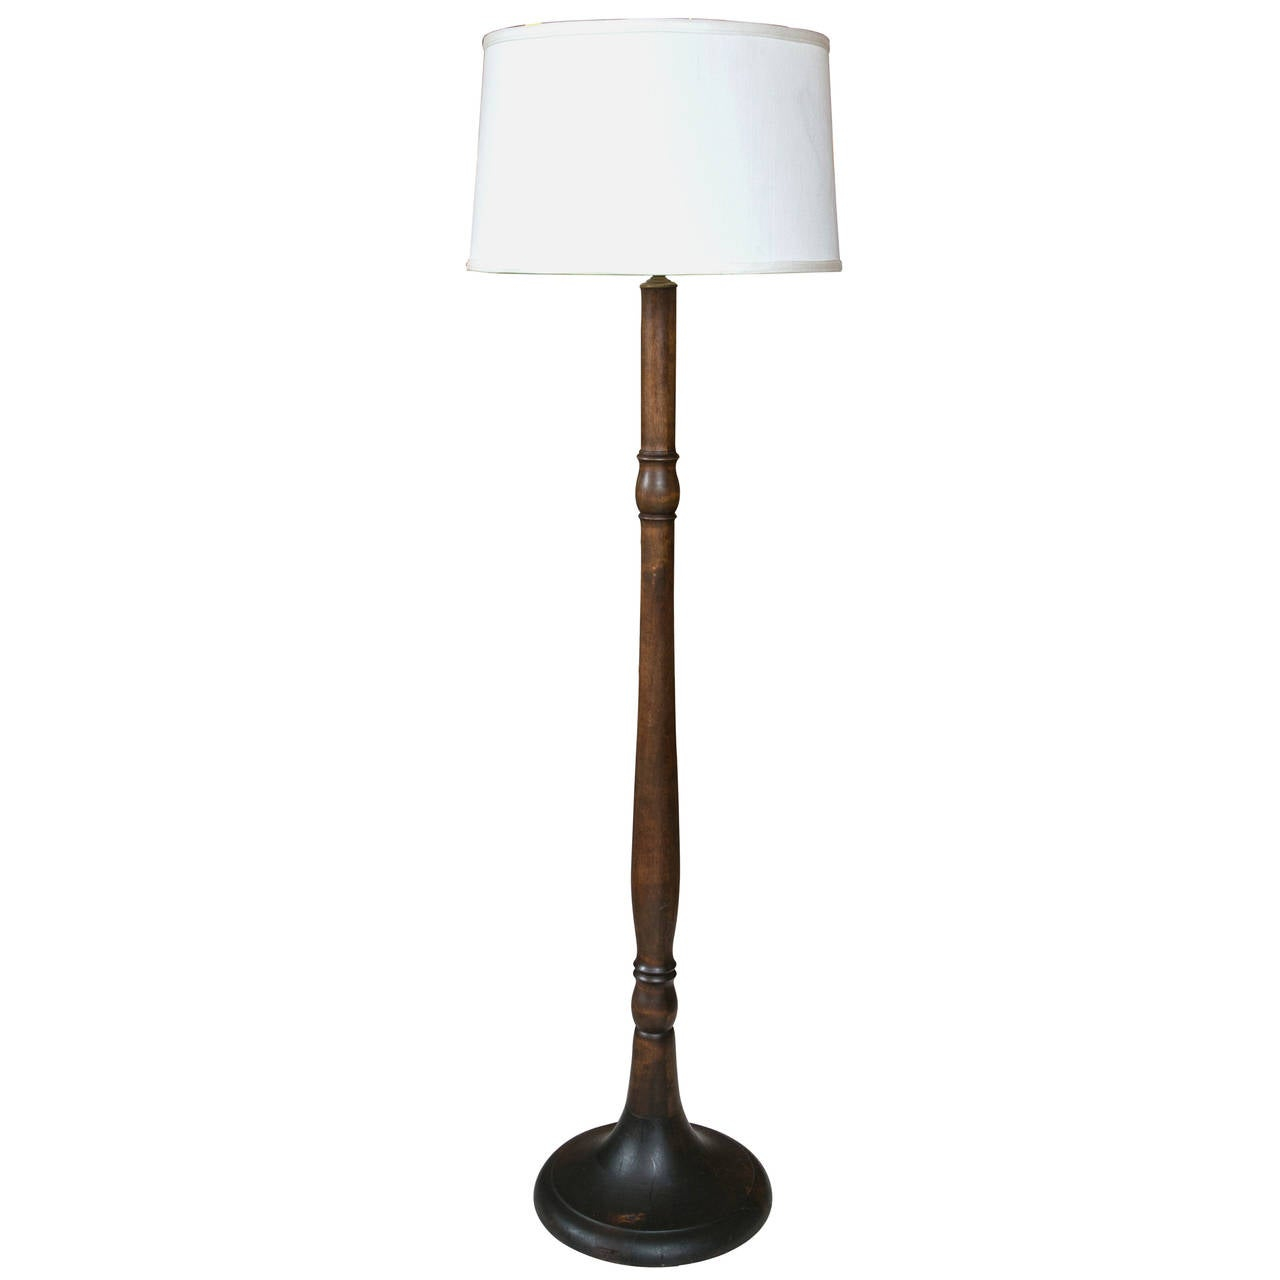 Large Turned Wood Floor Lamp At 1stdibs Lamps Empire pertaining to size 1280 X 1280